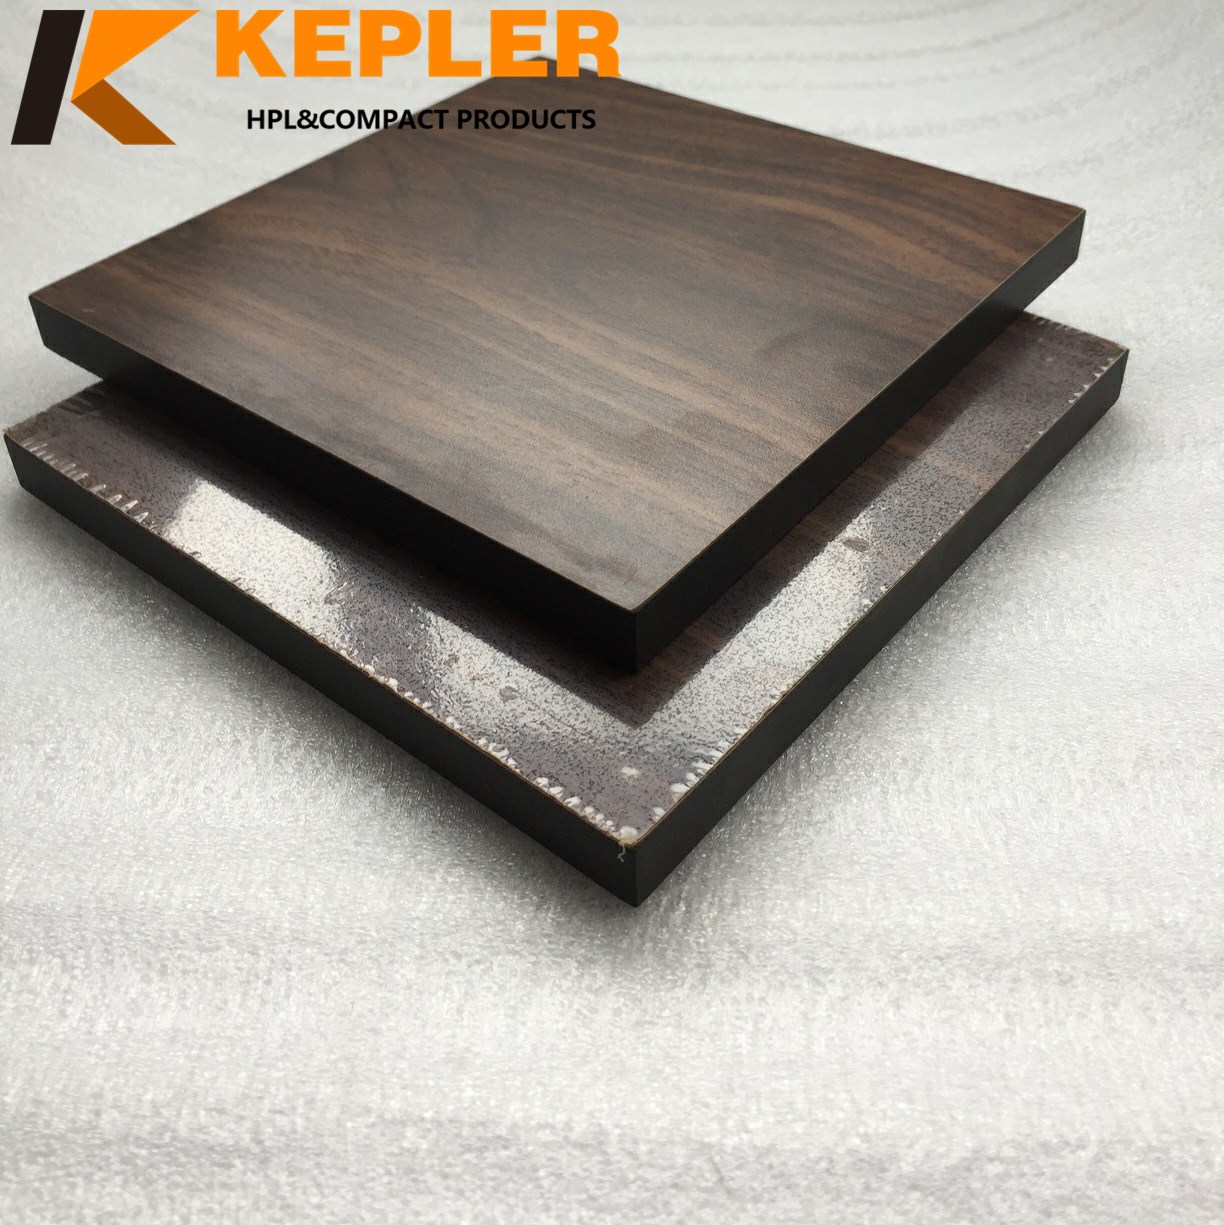 Kepler fireproof eco-friendly 12mm 13mm phenolic compact hpl board for outdoor table top